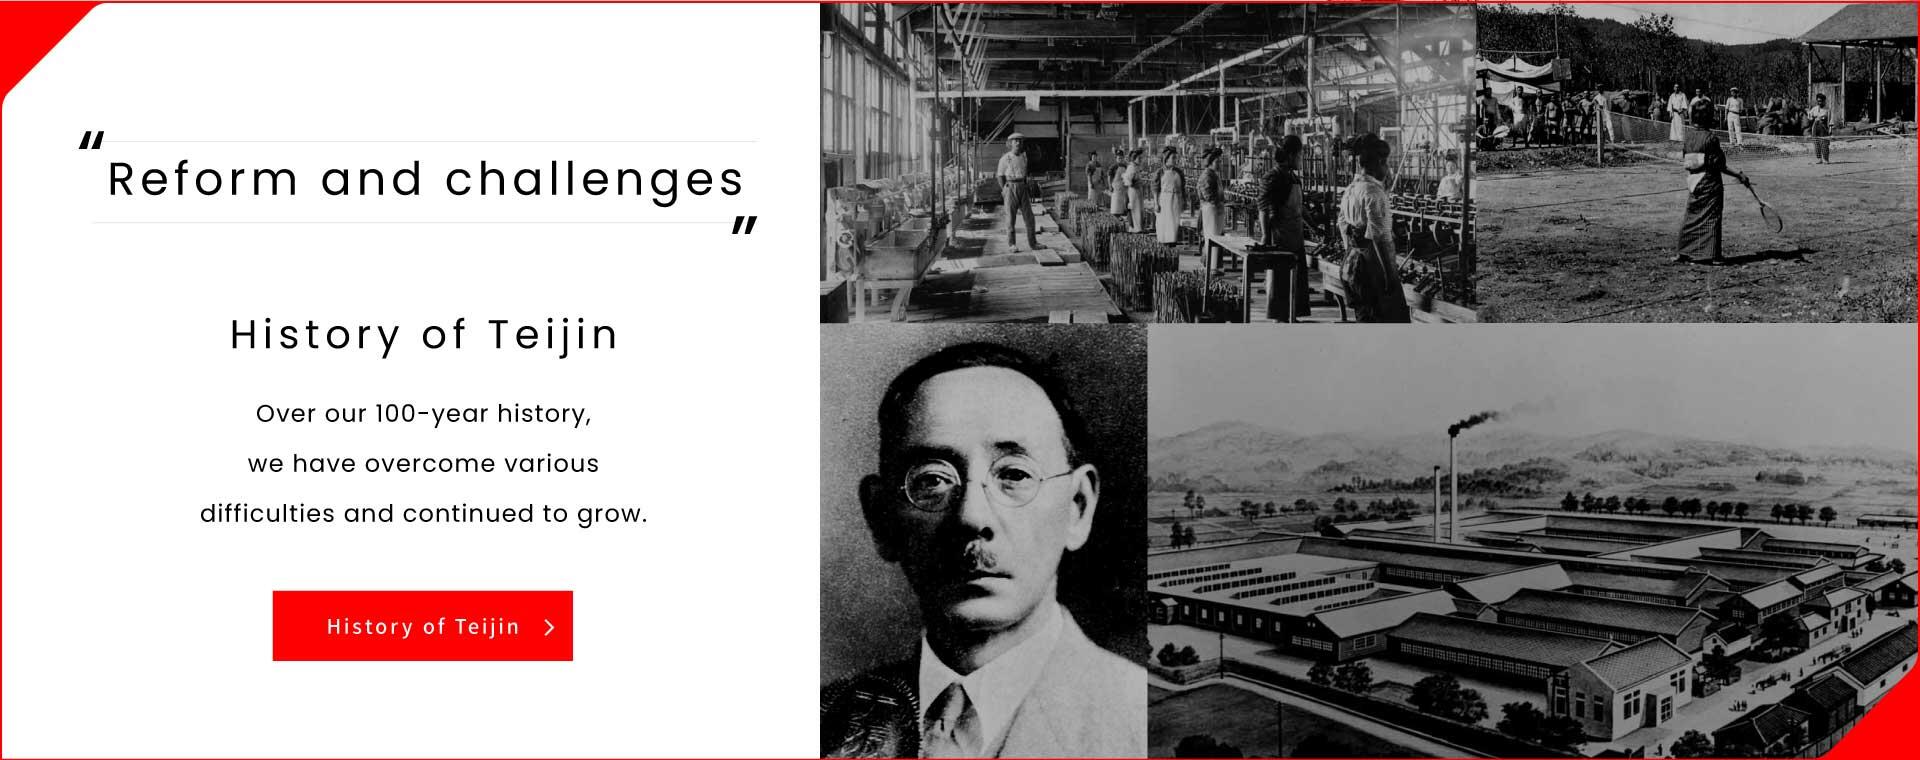 Reforms and embrace challenges. History of Teijin